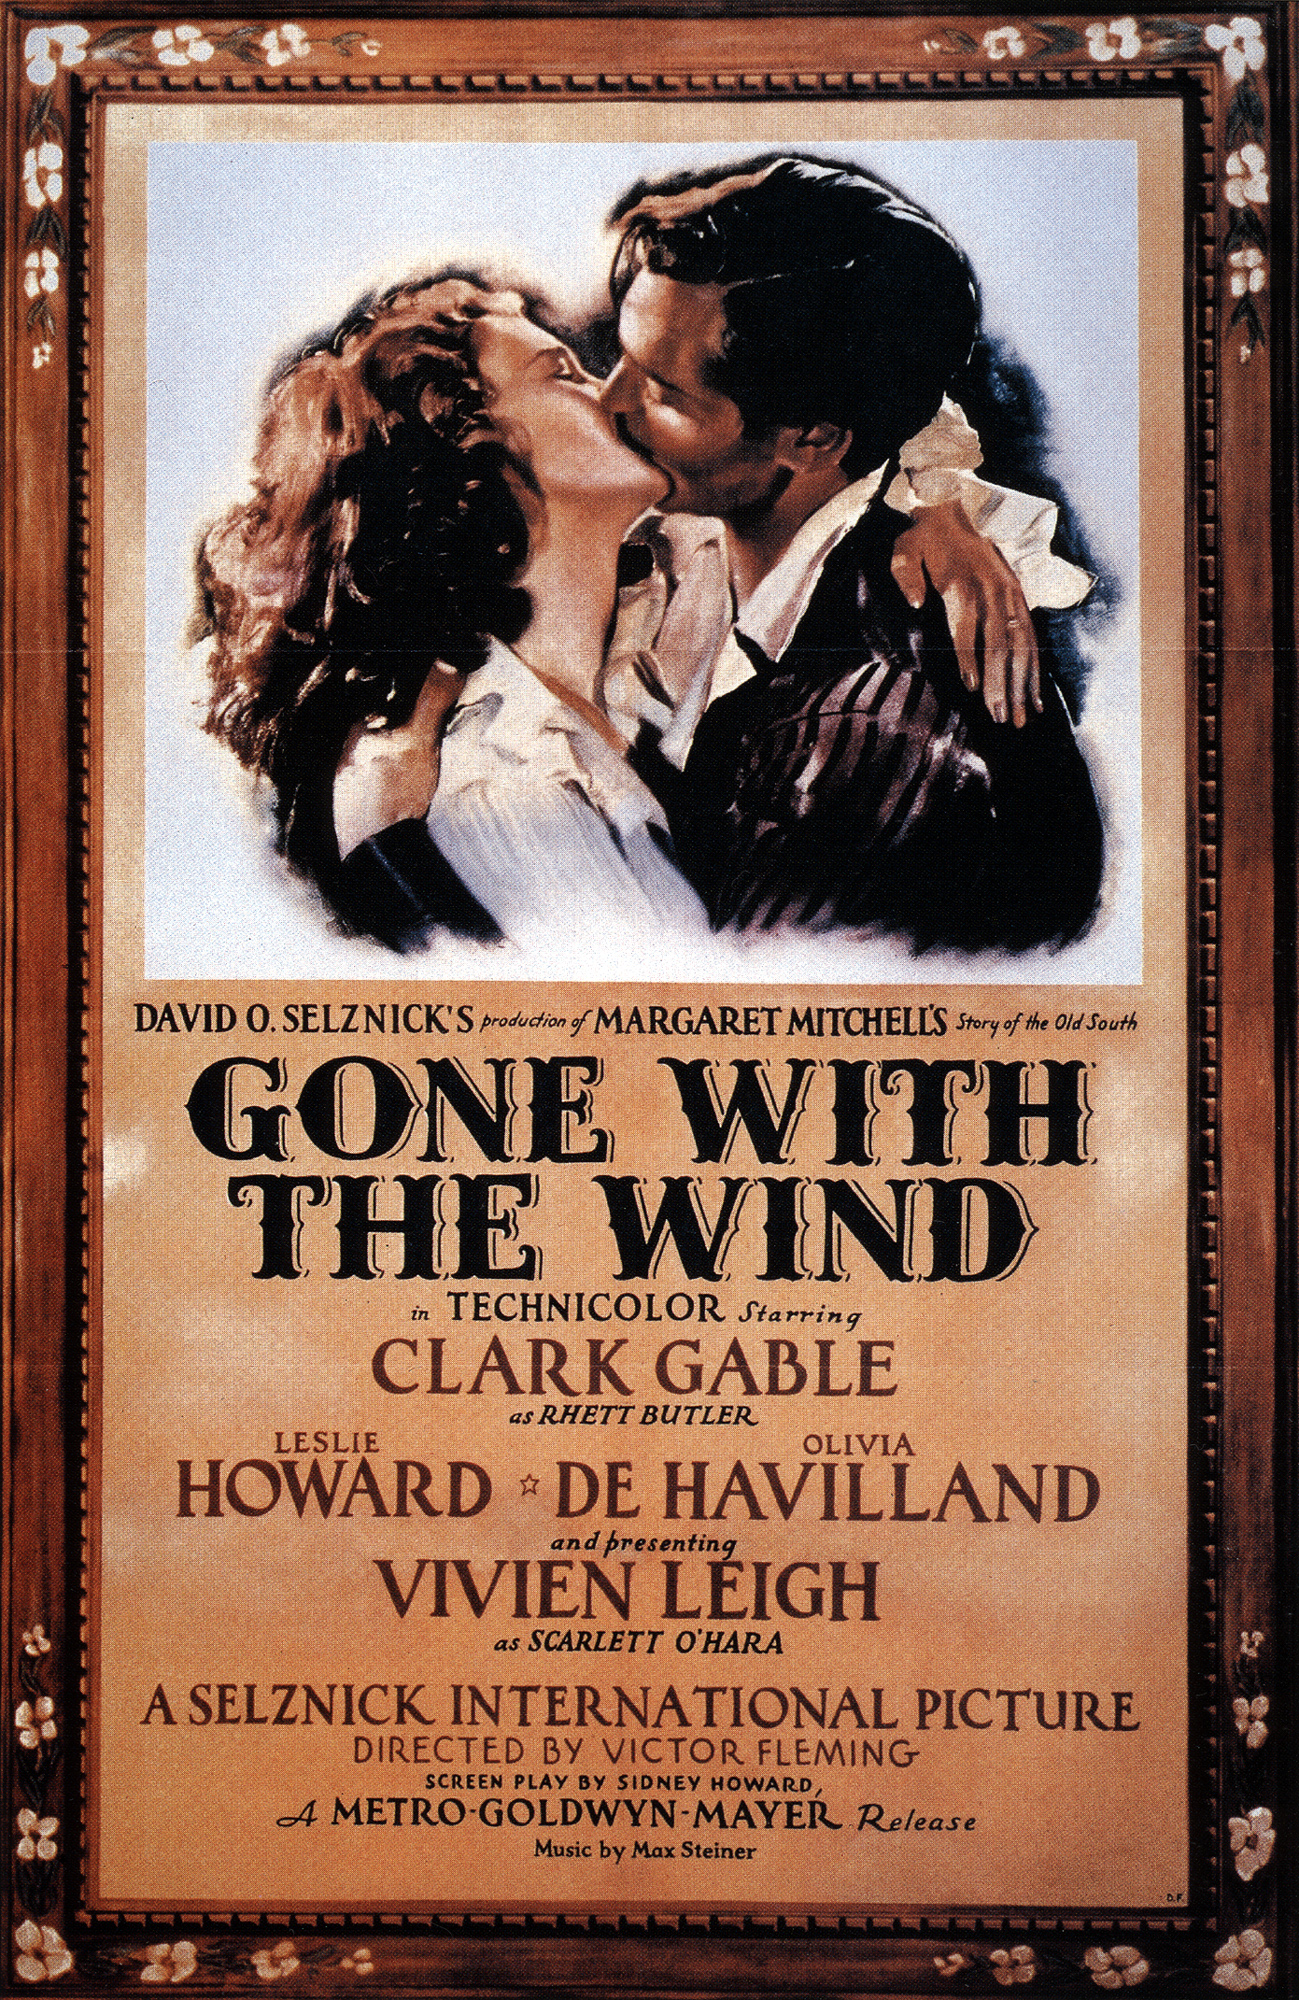 Does Gone with the Wind belong in a museum?